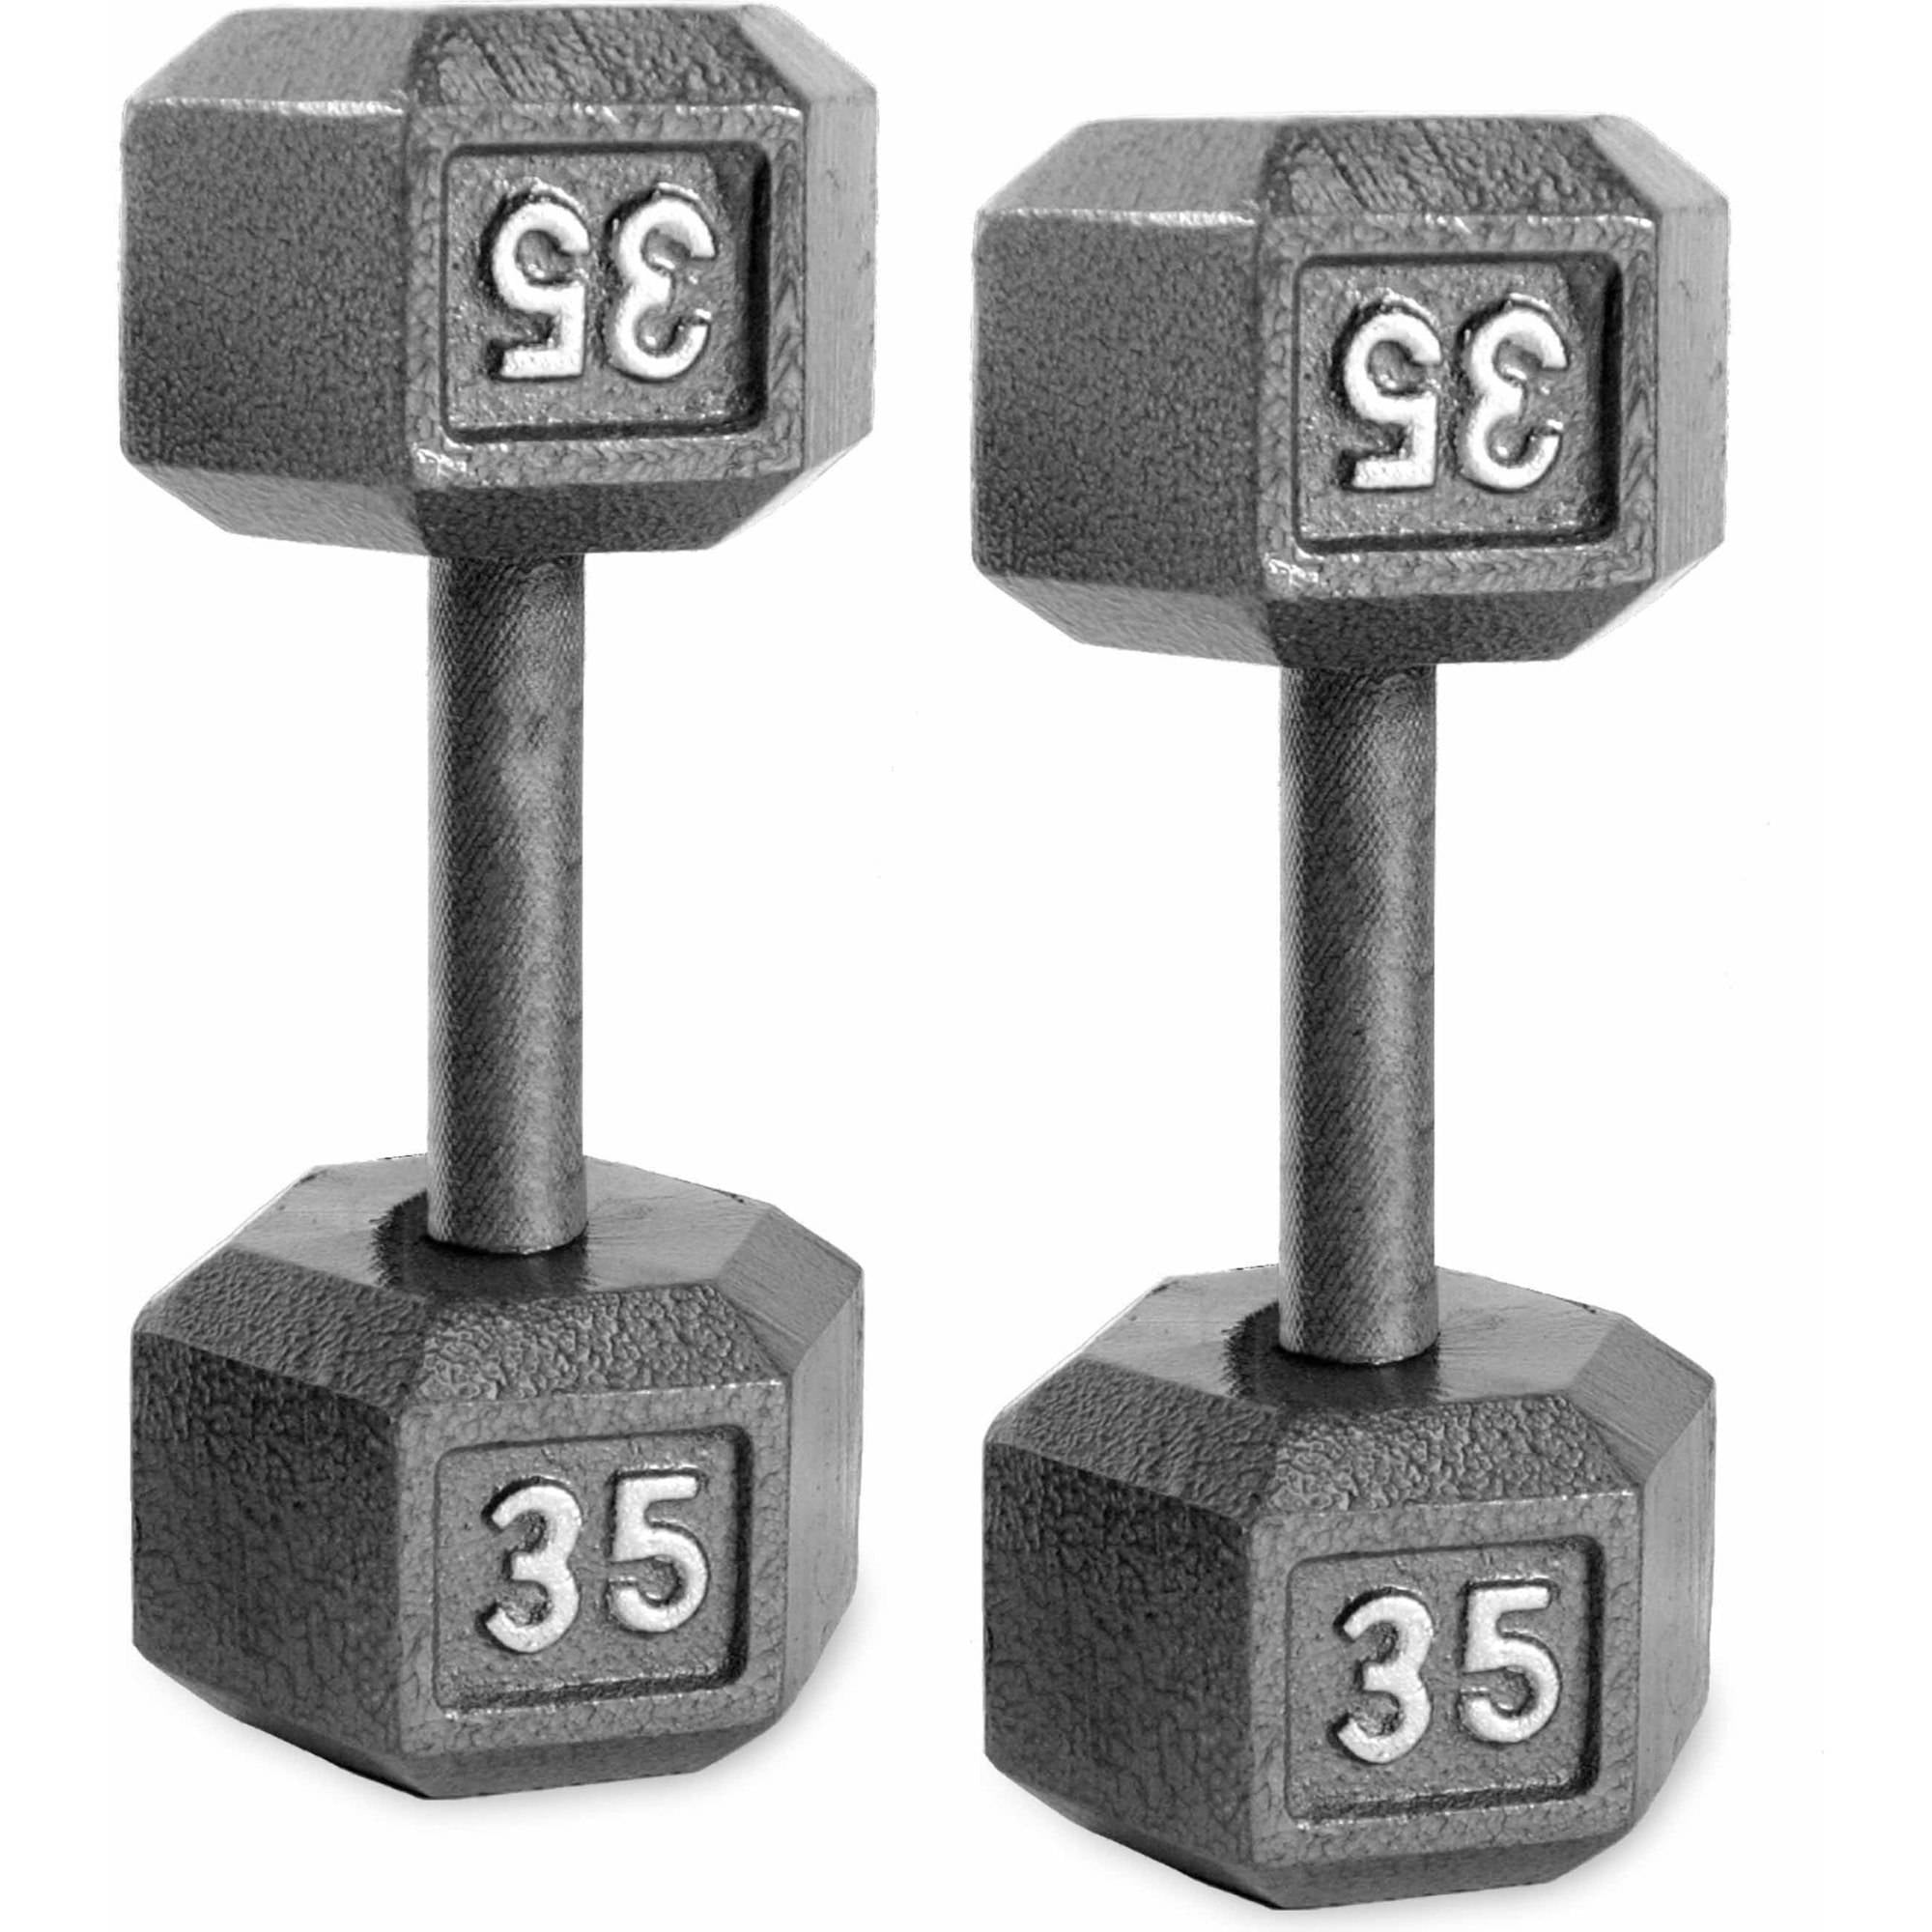 50 LB Dumbbells Set Gym Weights Barbell Dumbbell Body Building Free Weight  Set